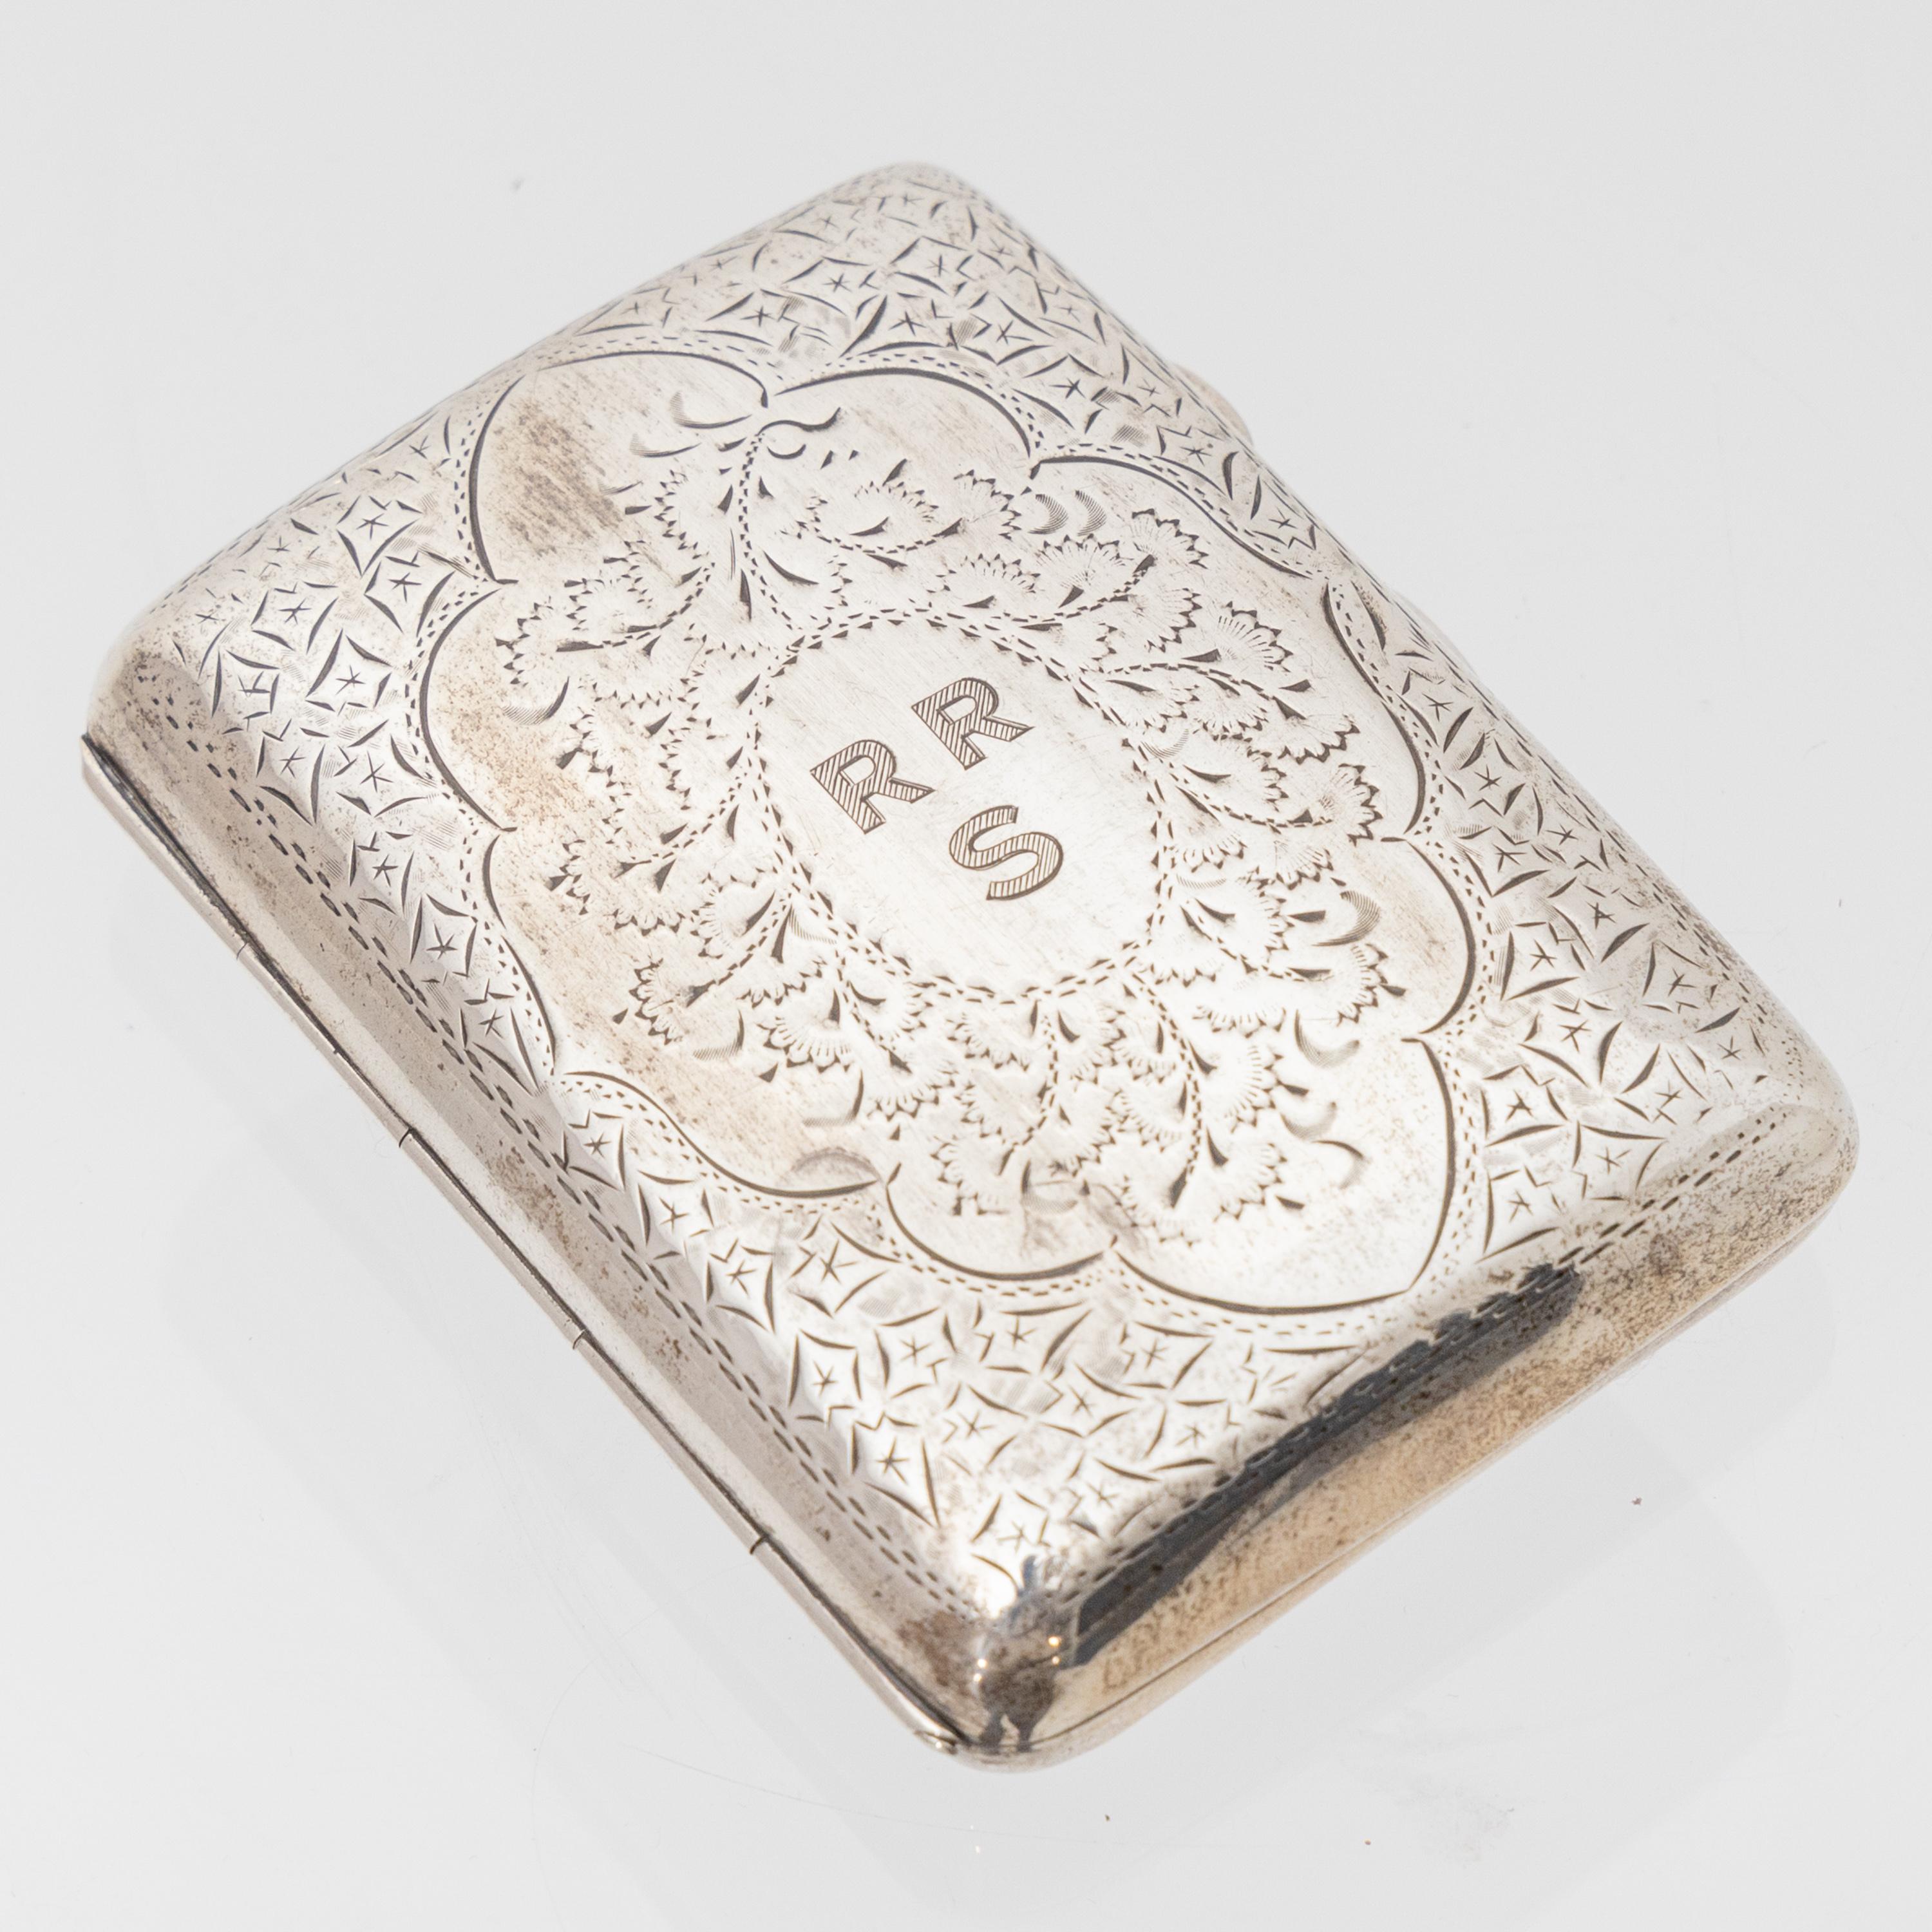 Silver cigarette case stamped Birmingham 1907 and J.G. (Joseph Gloster, reg. 1901). Slightly concave shape with vine motifs on the wall and monogram RRS. Inside gilded with rubber bands.